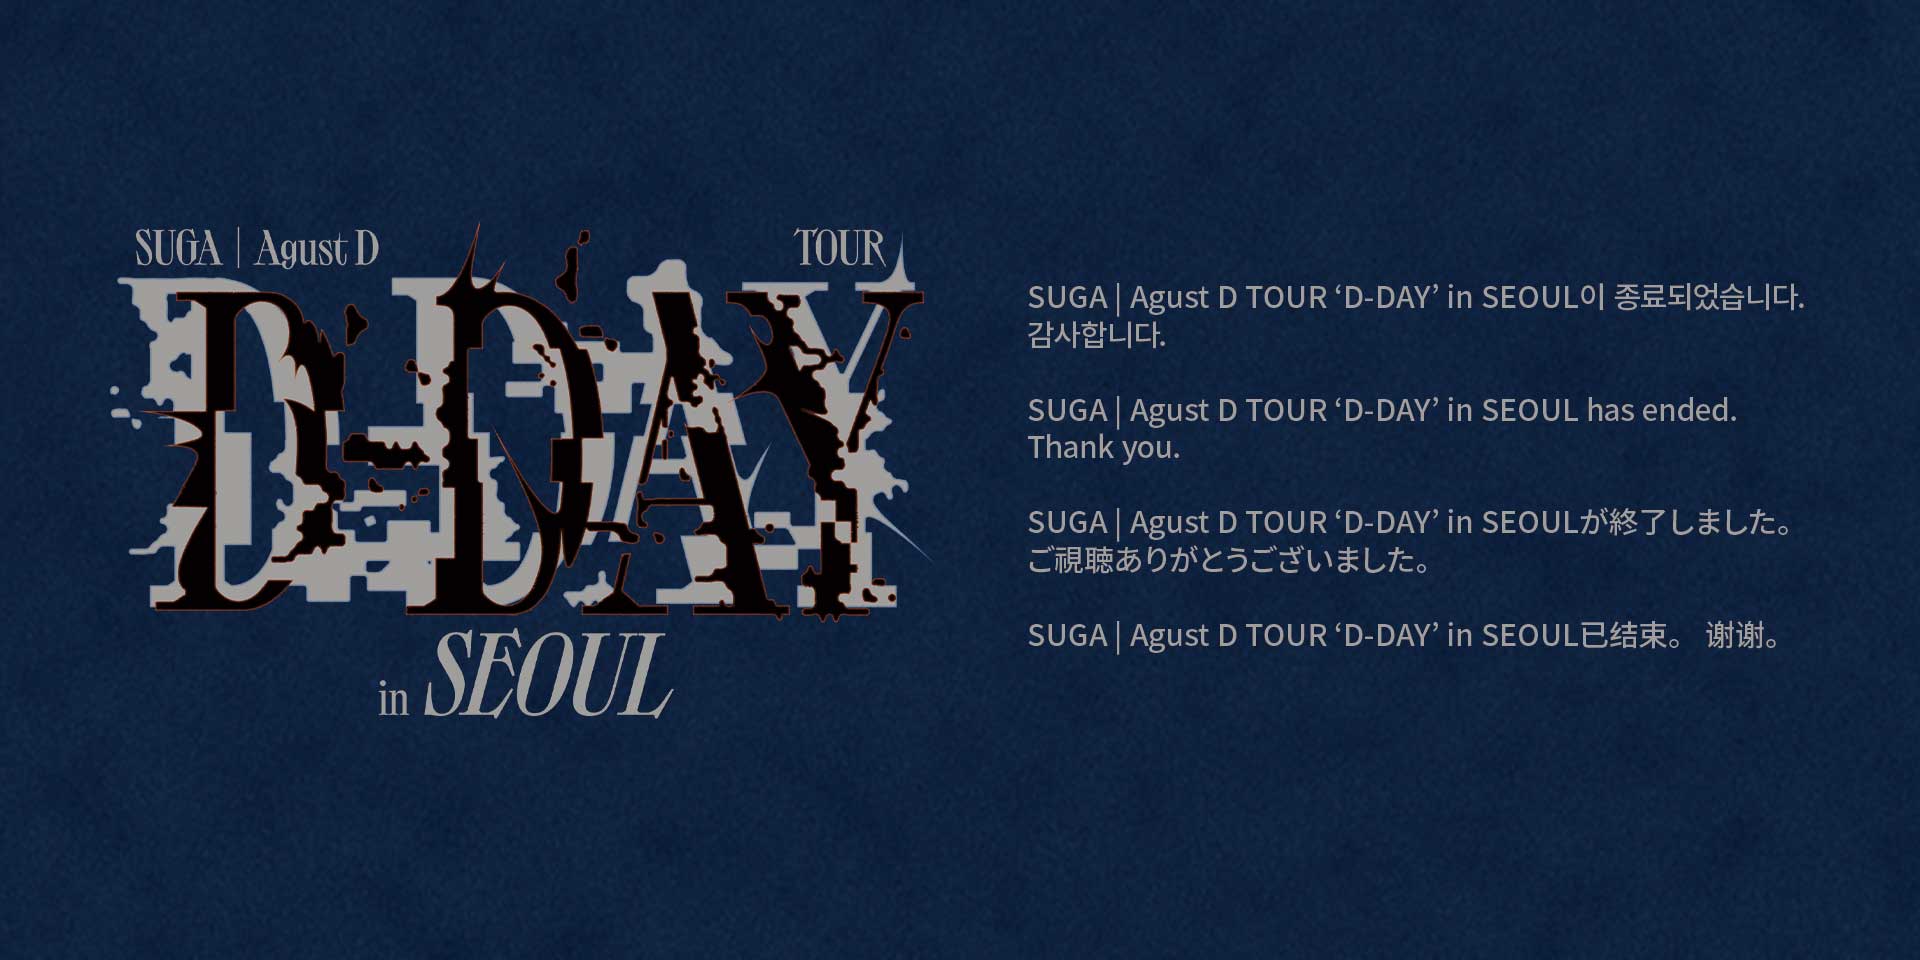 Watch SUGA | Agust D TOUR 'D-DAY' in SEOUL on Weverse Concerts